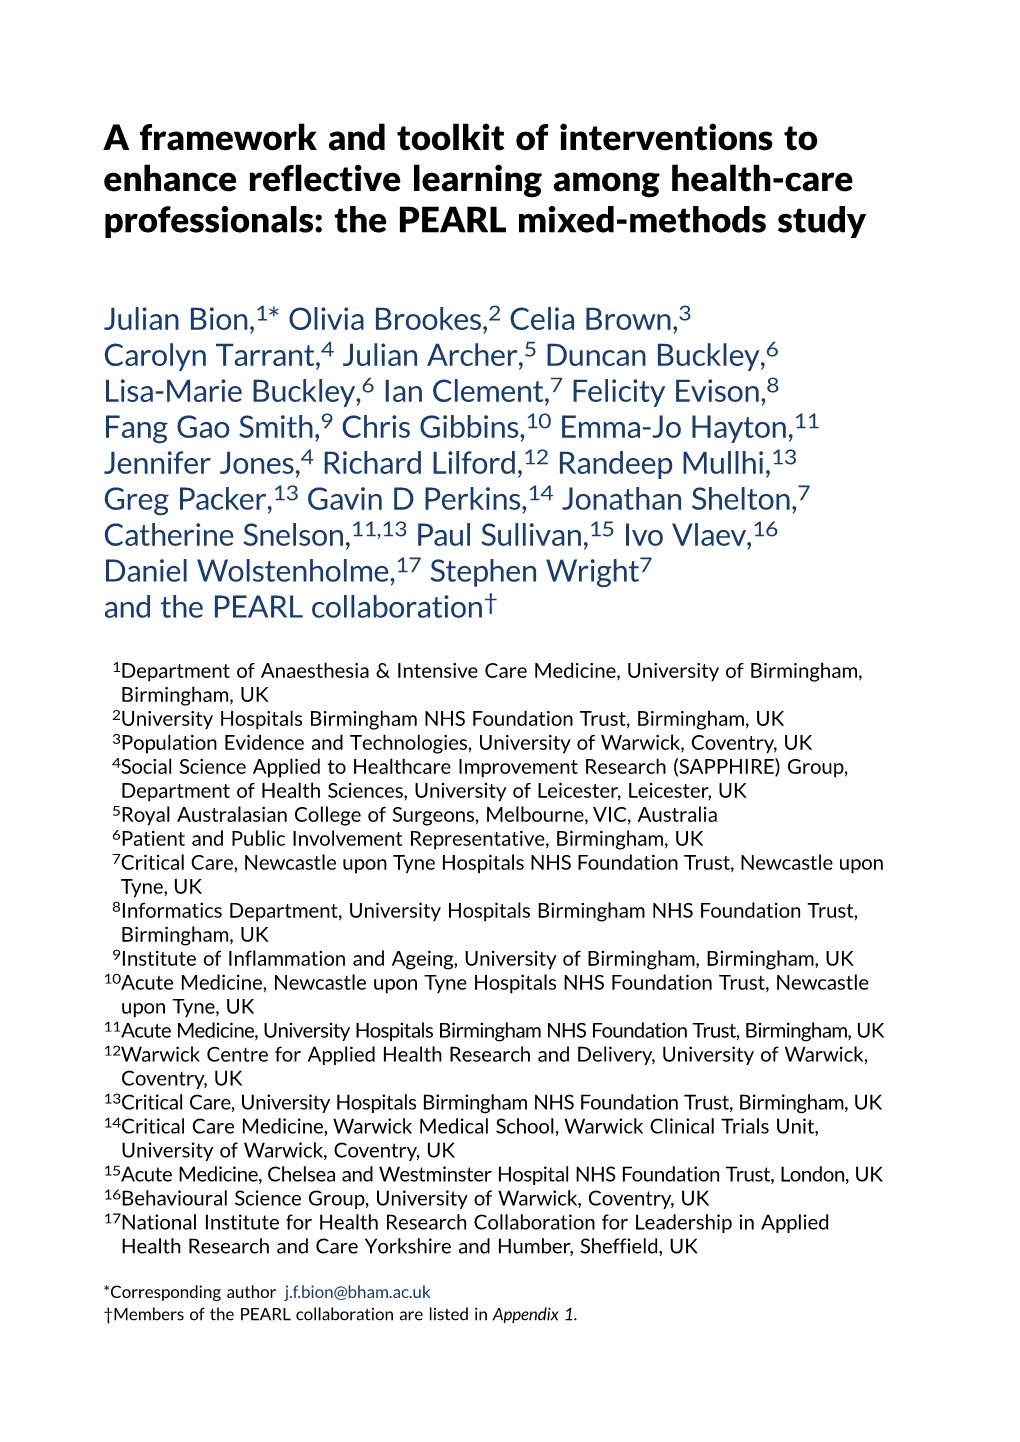 The PEARL Mixed-Methods Study